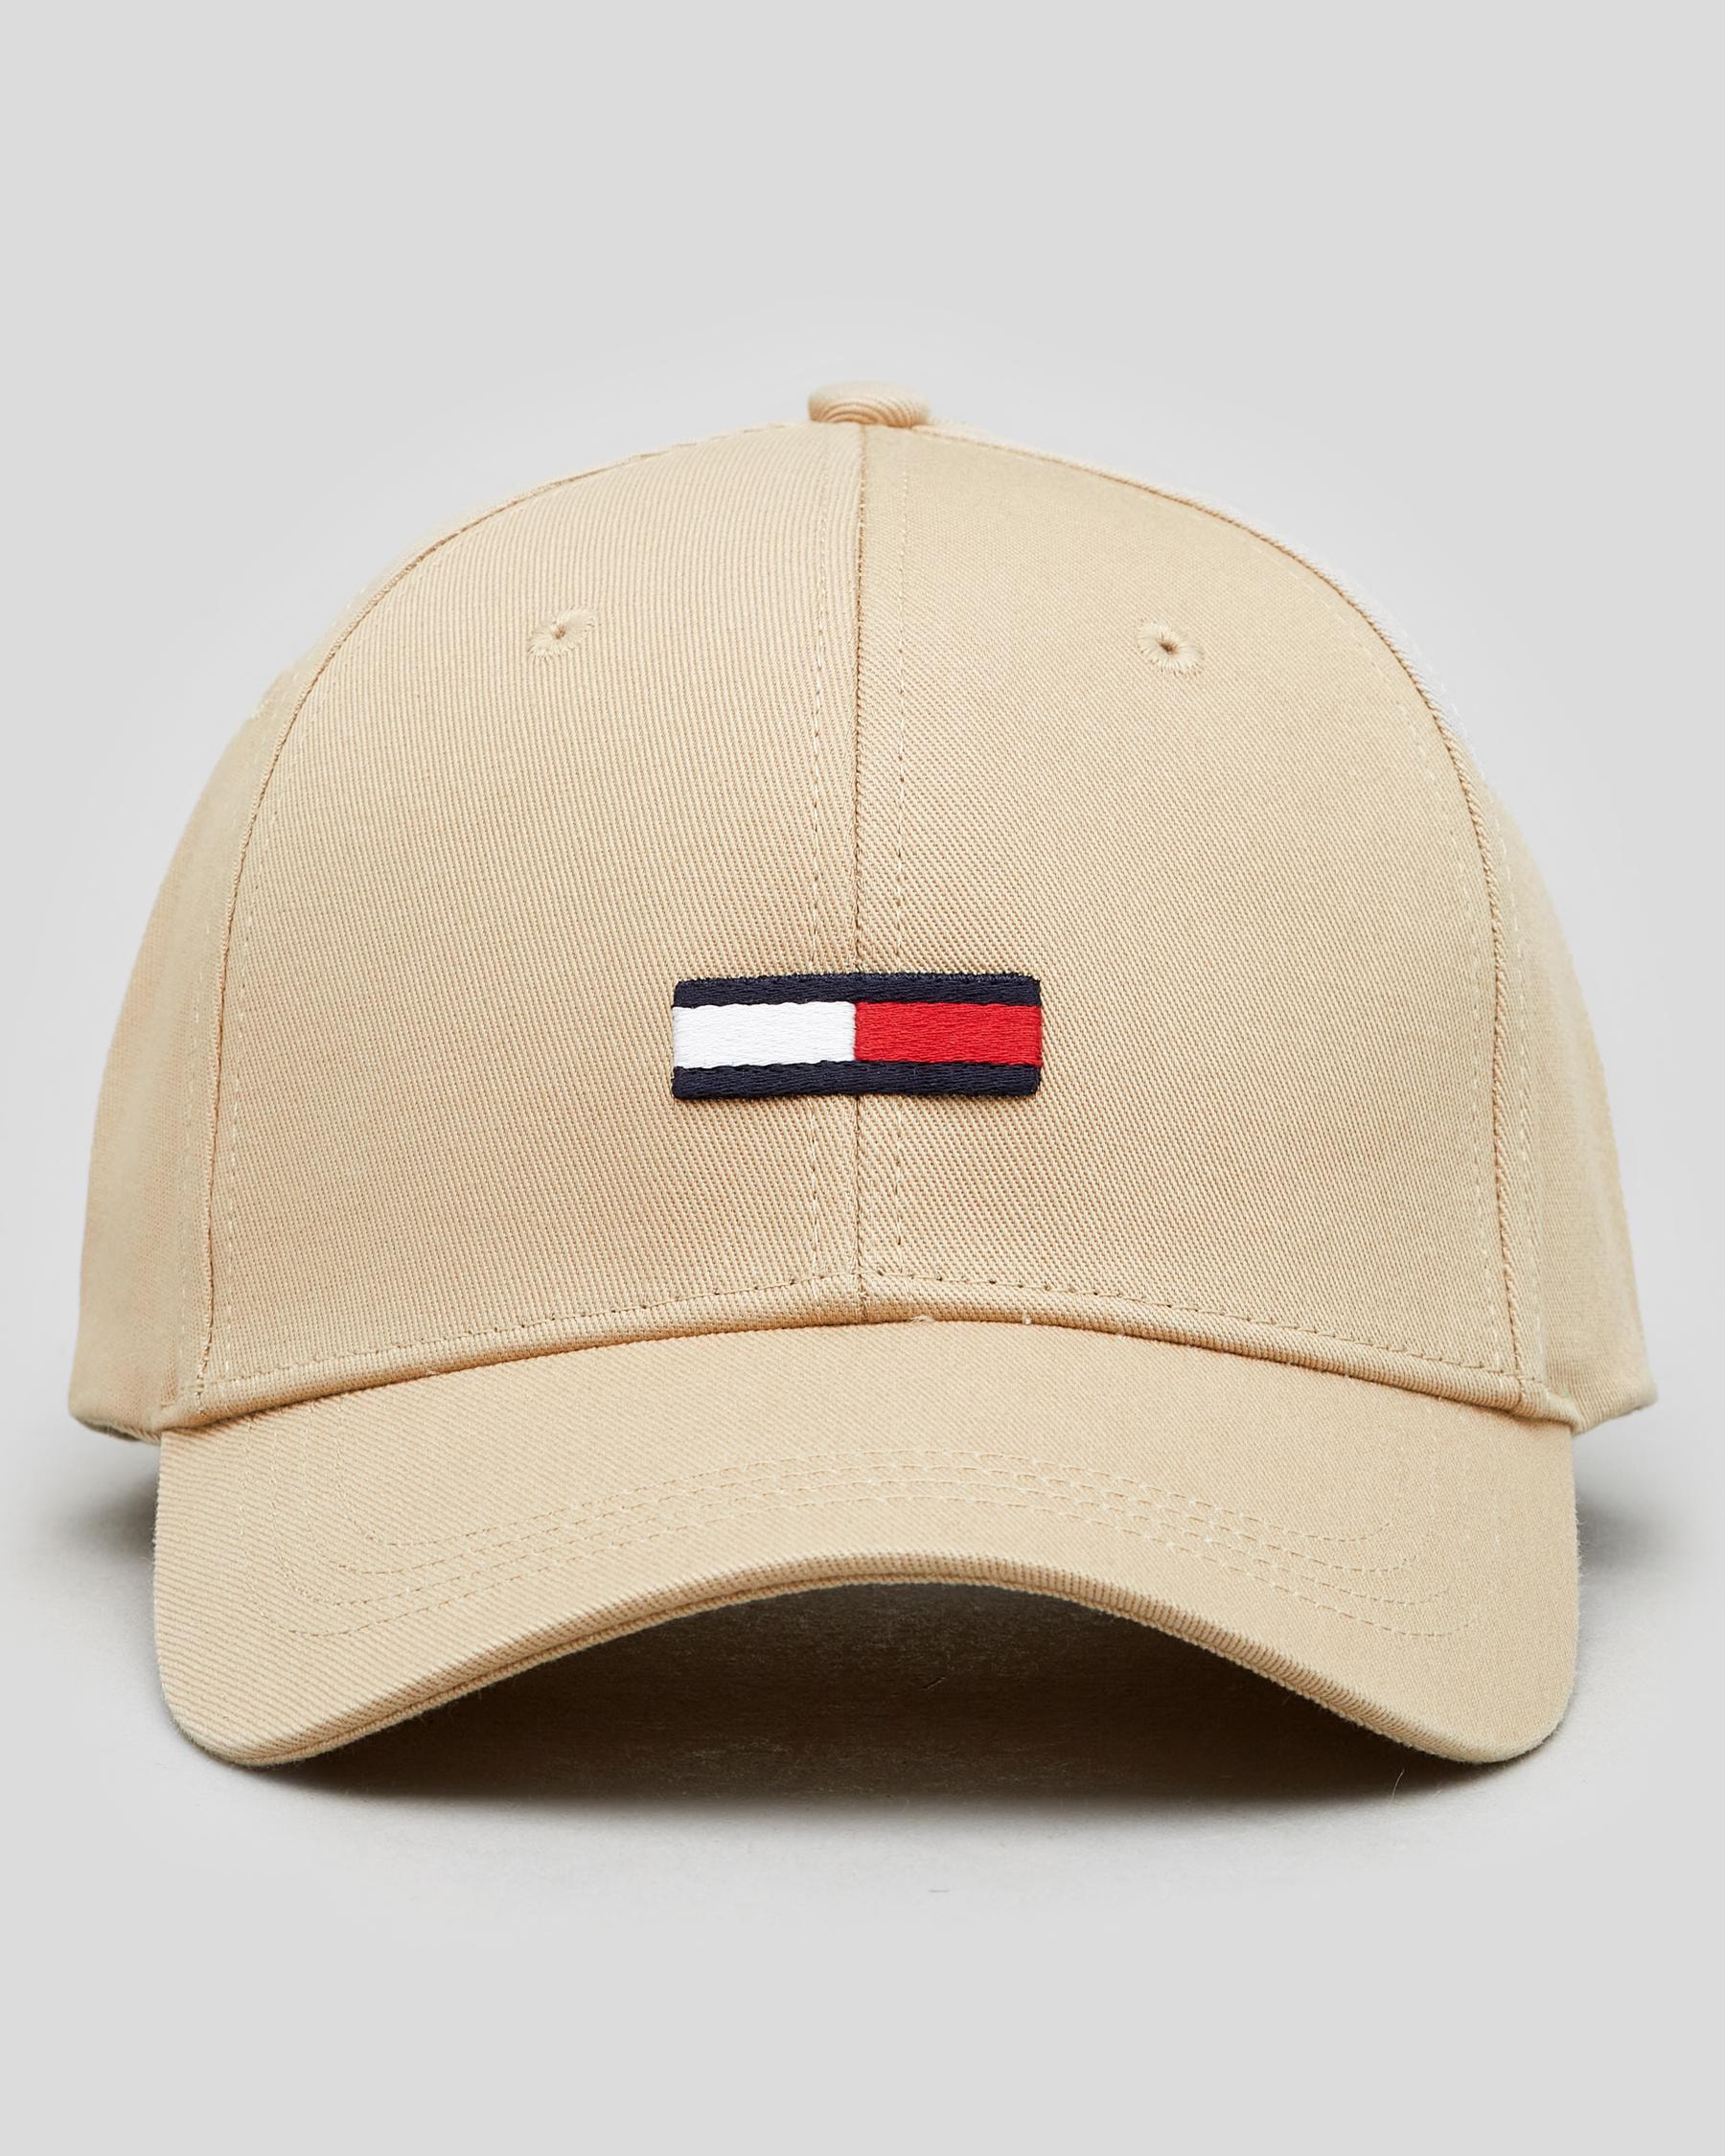 Tommy Hilfiger TJM Returns City States FREE* Shipping Beach - Flag Easy & United - Beige Soft Cap In